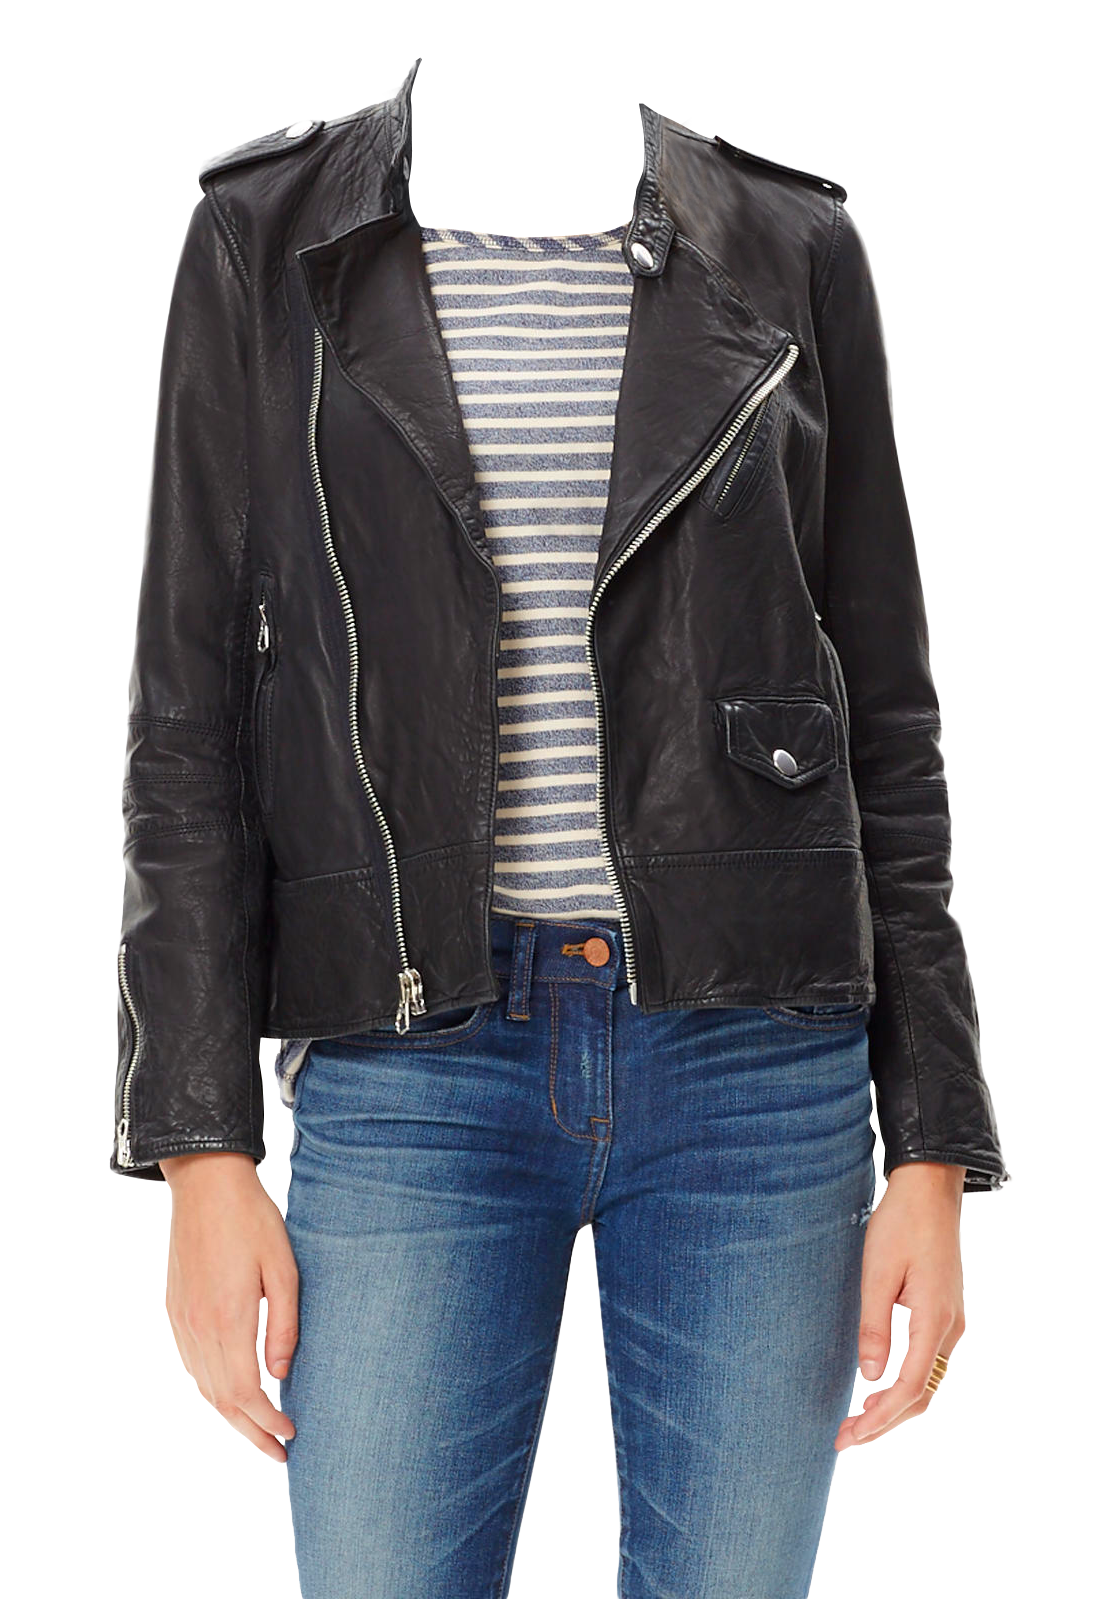 Leather Jacket Casual Free Download PNG HQ PNG Image